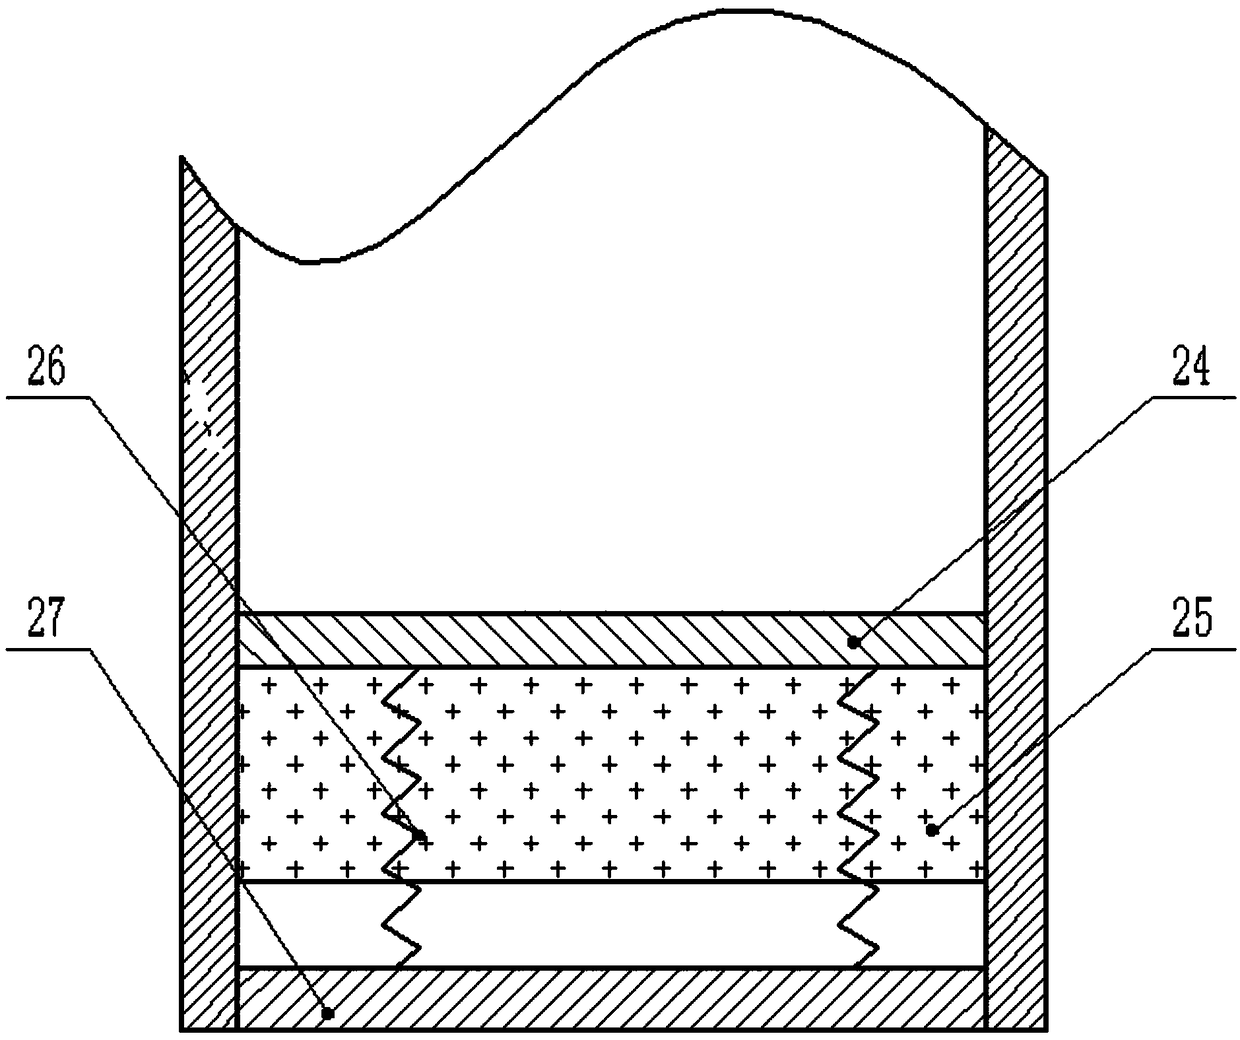 Cloth perforating device